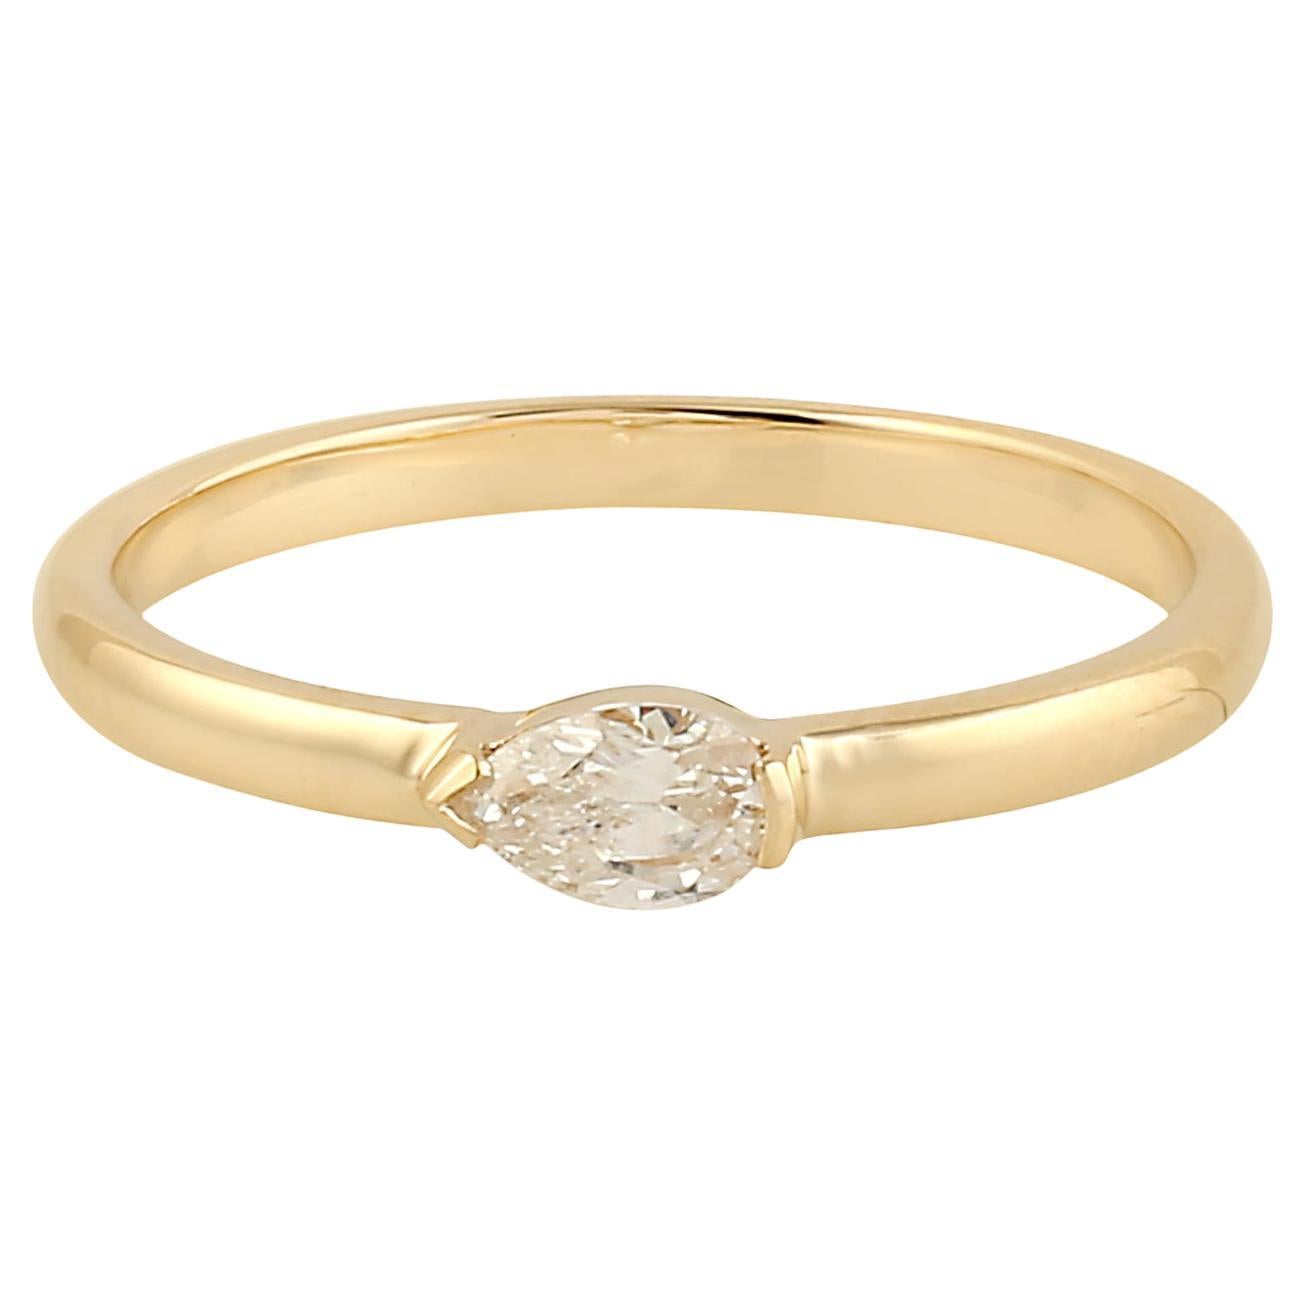 Pear Shaped Rosecut Diamond Band Ring Made In 18k Yellow Gold